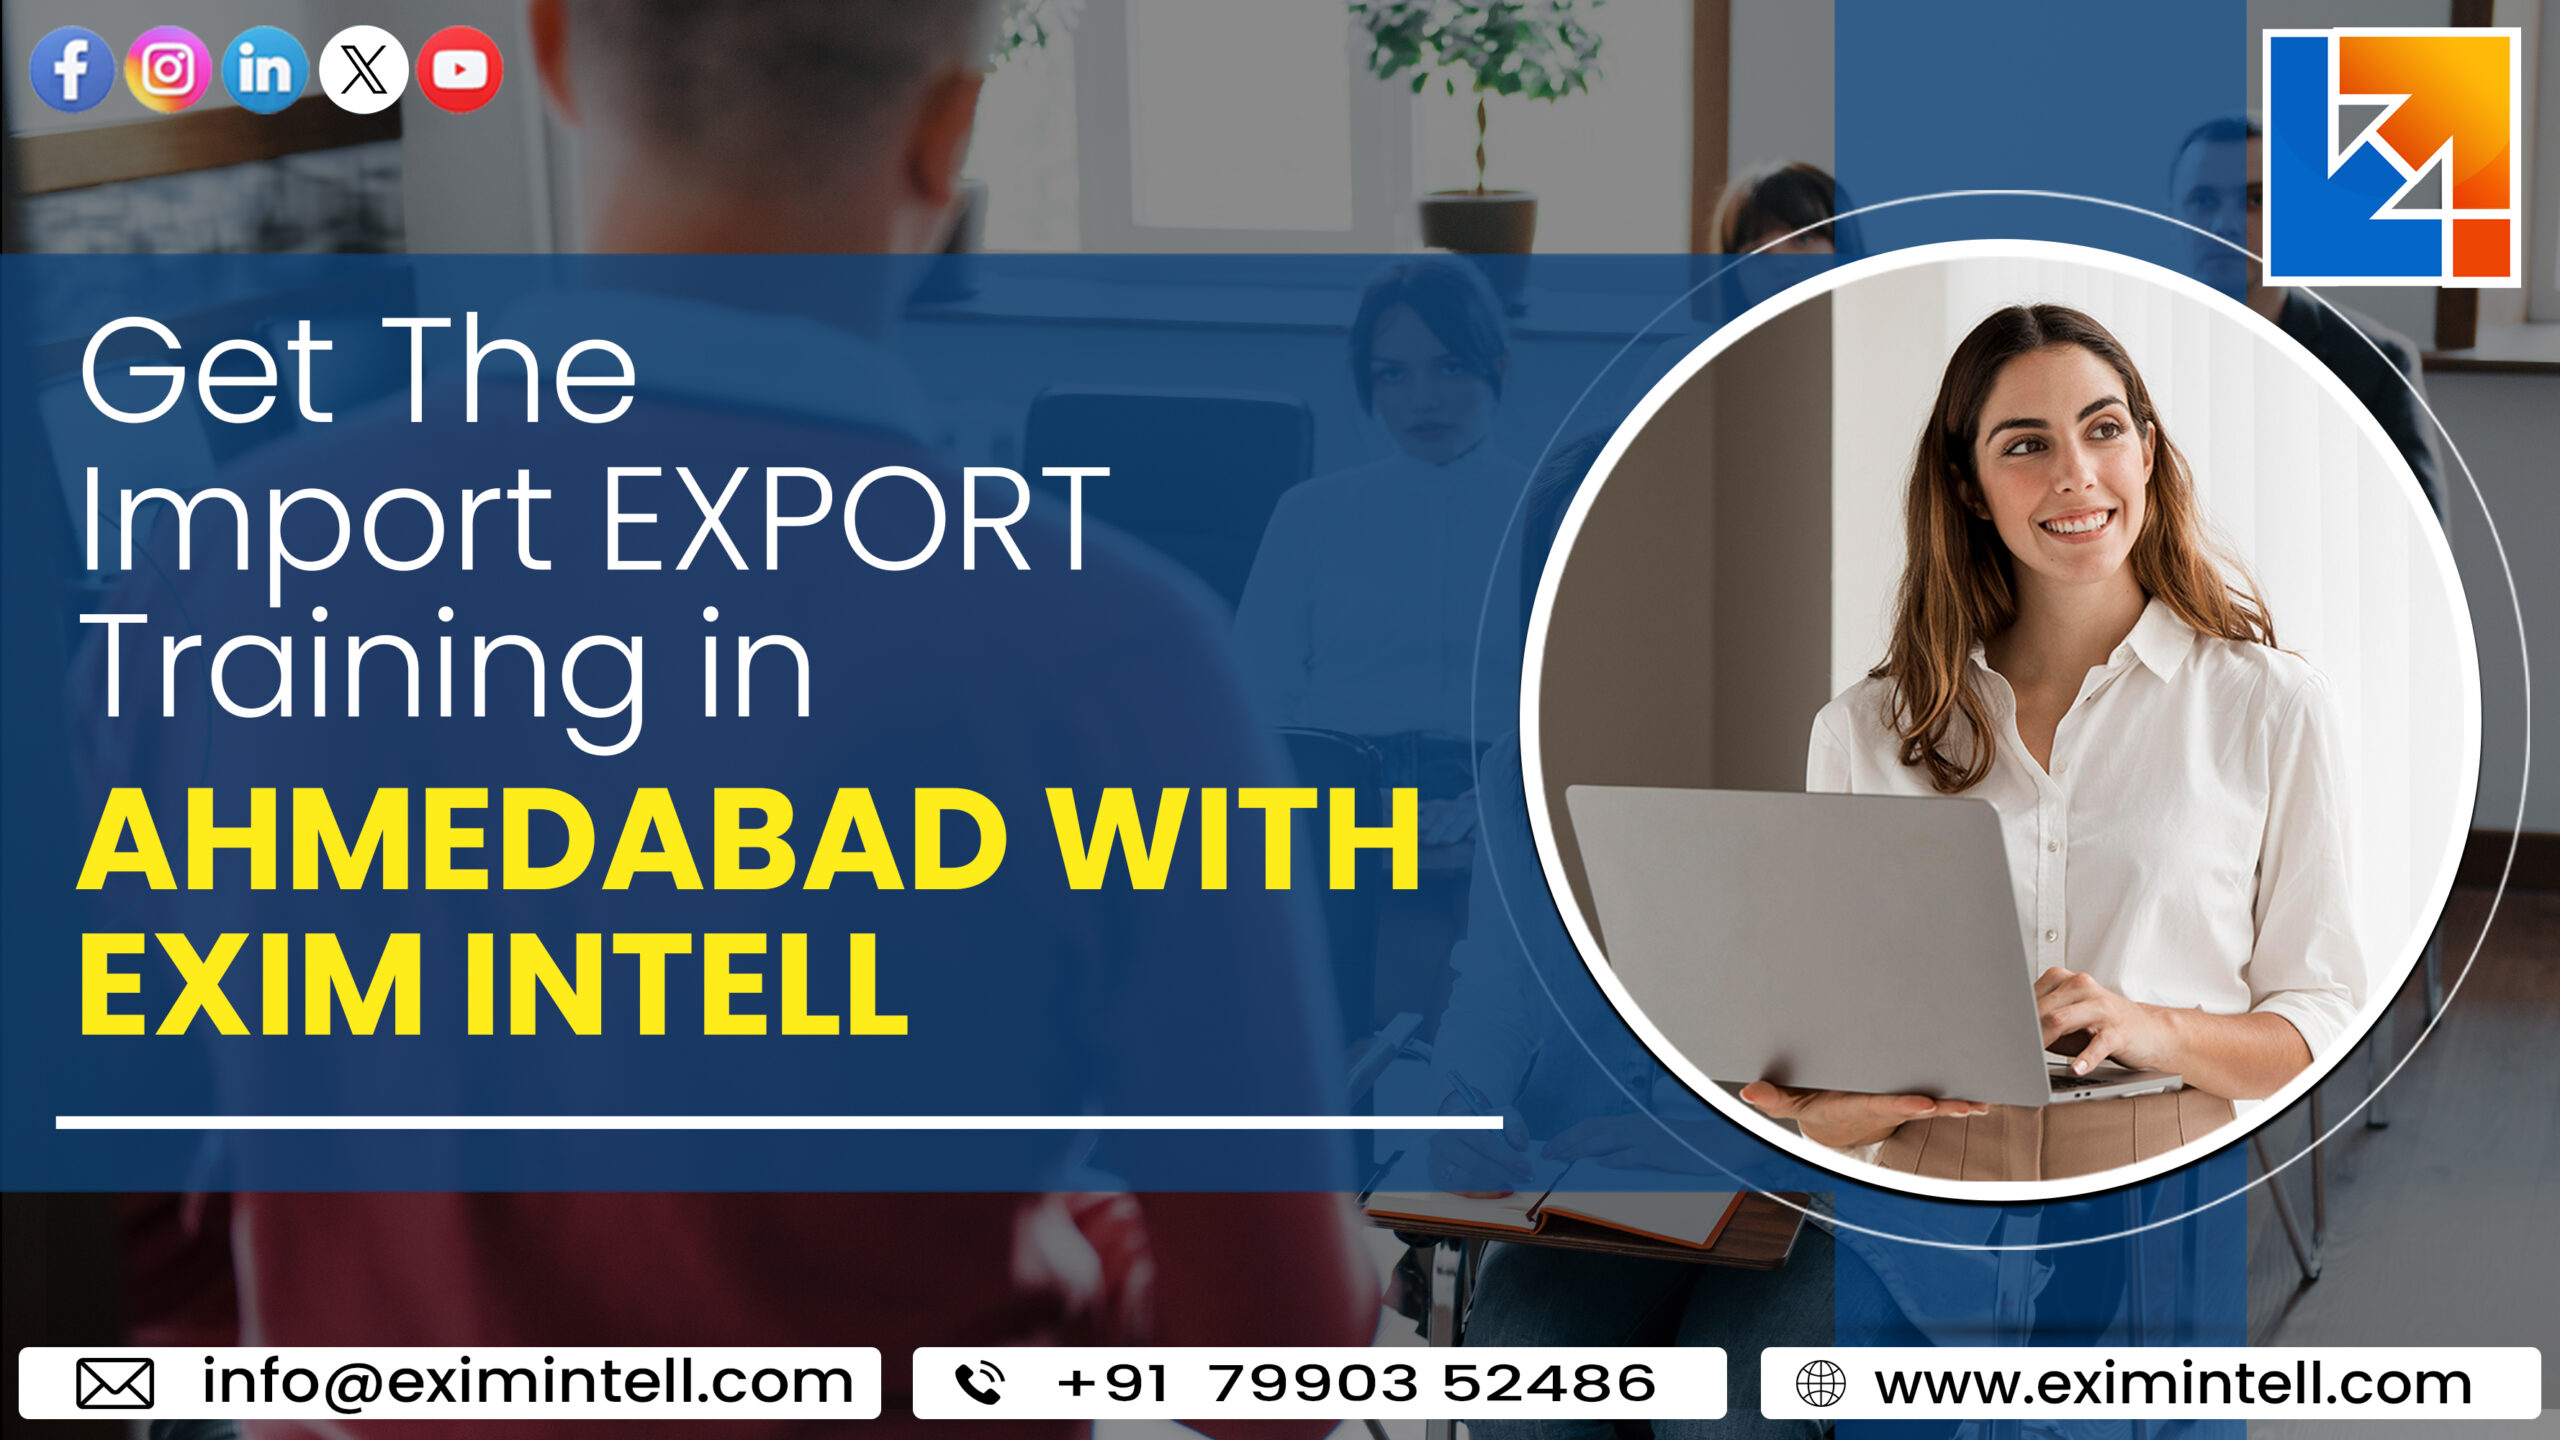 Get the Import Export Training in Ahmedabad with Exim Intell